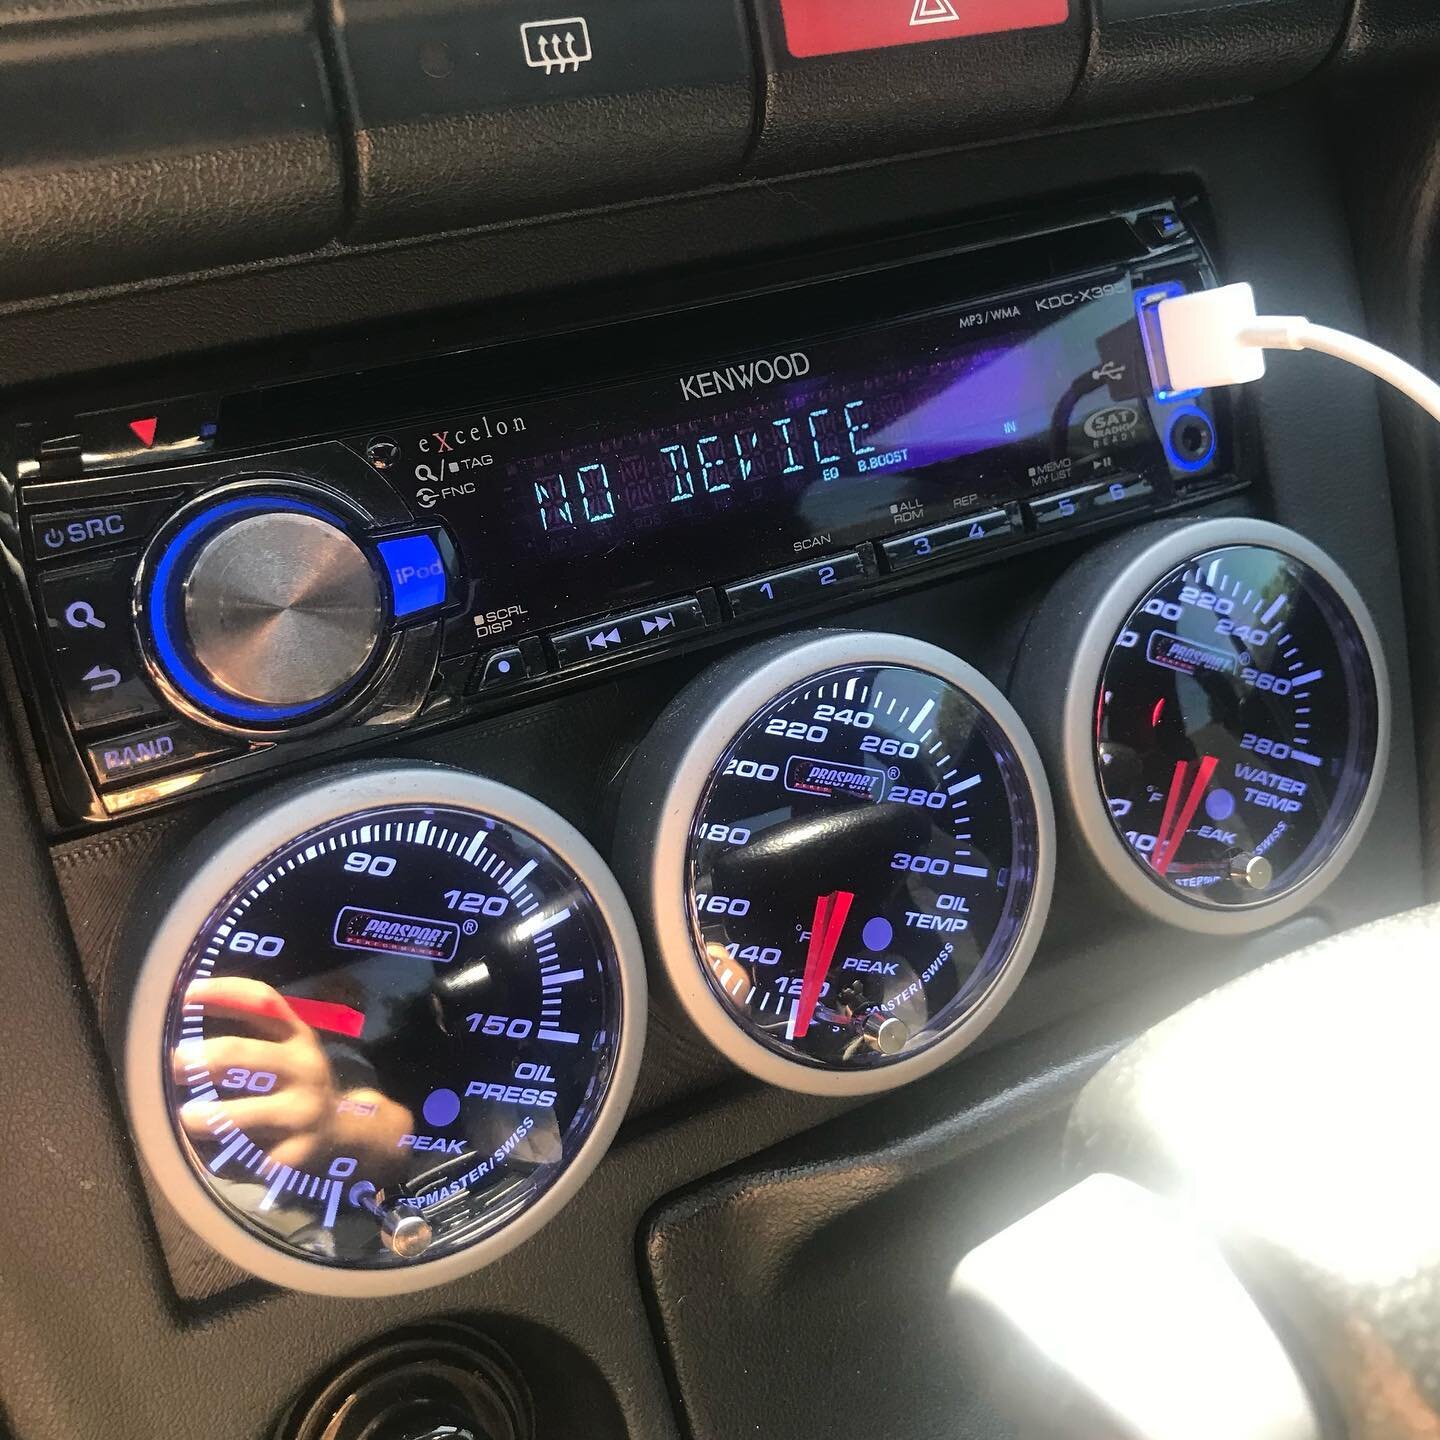 After the headgasket on our Zenki let go, I needed a way to mount some gauges to monitor things. I didn't want to stick them onto the dash, as the dash is in great condition, nor did I want them blocking my view of the cluster. So I came up with this